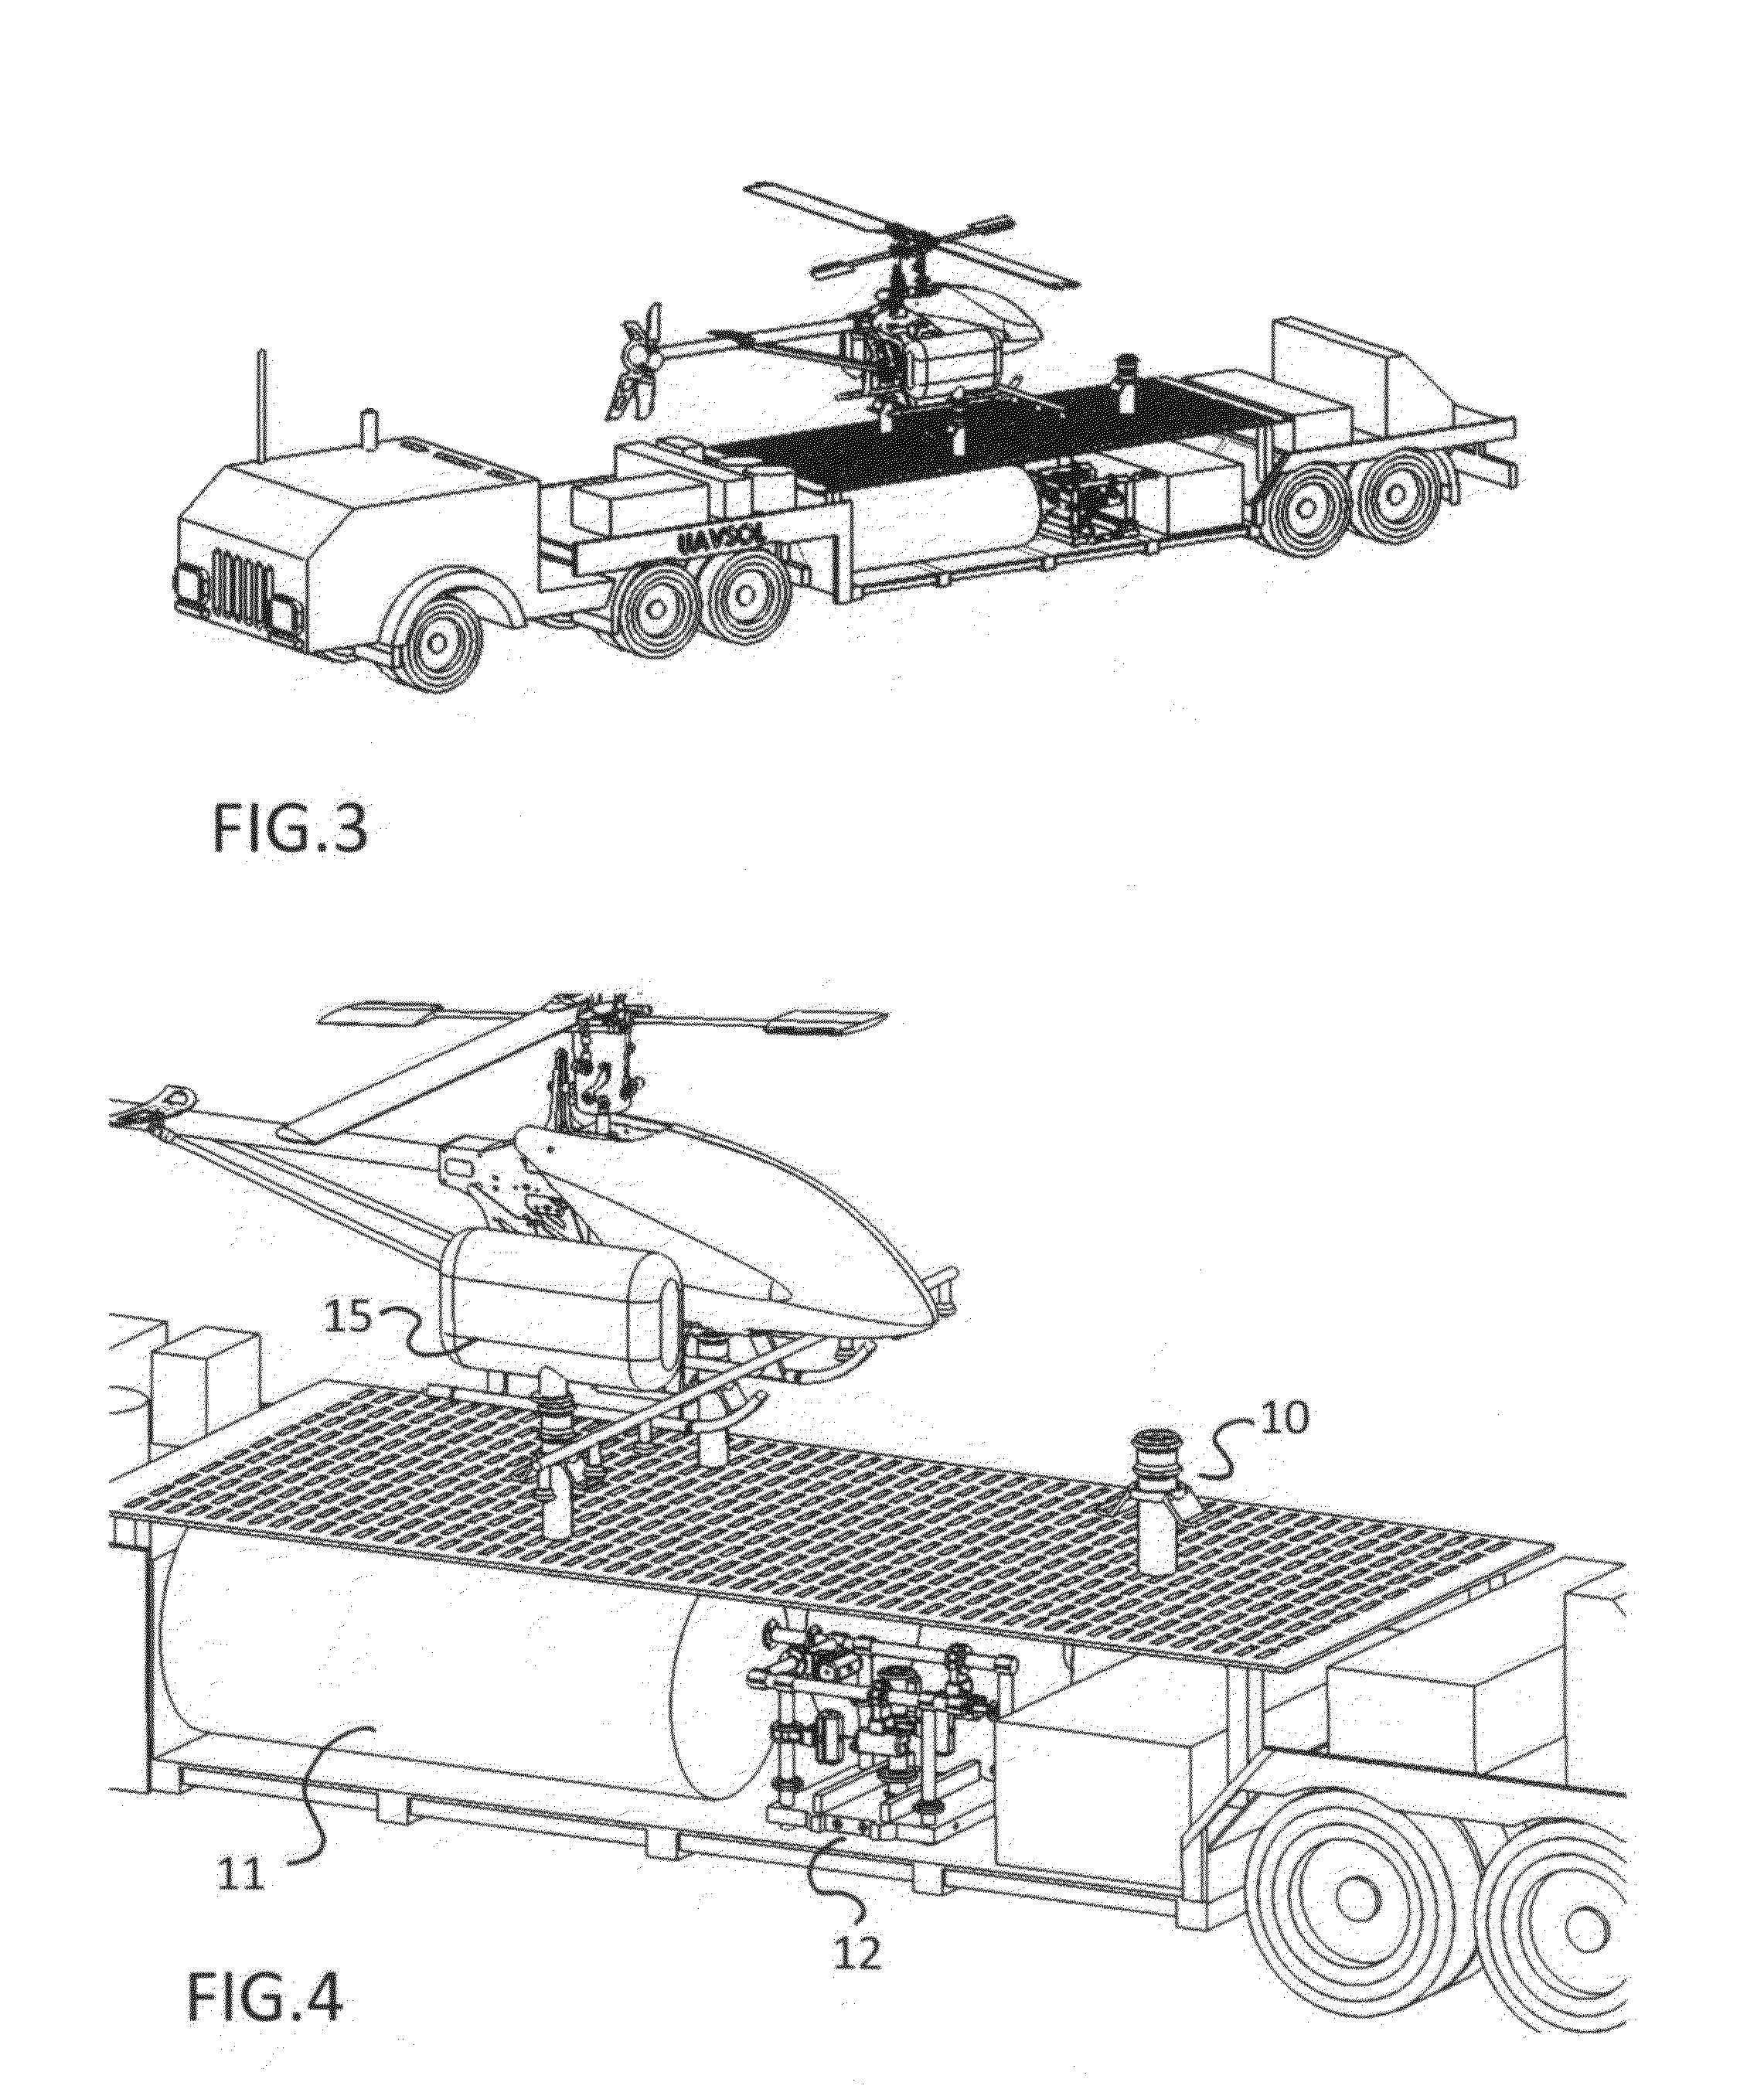 Fueling station for unmaned arial vehicle of the vertical takeoff types